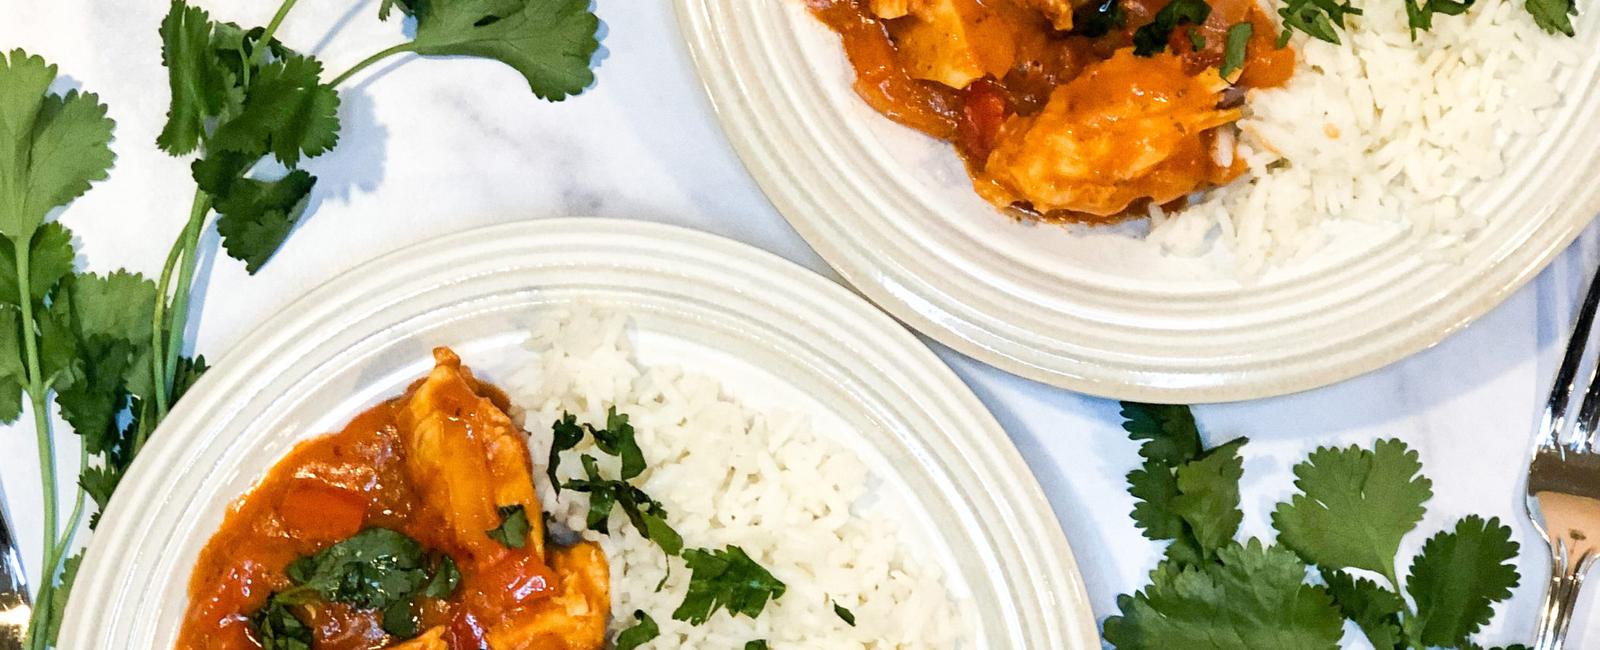 Chicken tikka masala is now one of the british national dishes not only because it is the most popular but because it is a perfect illustration of the way britain absorbs and adapts external influences